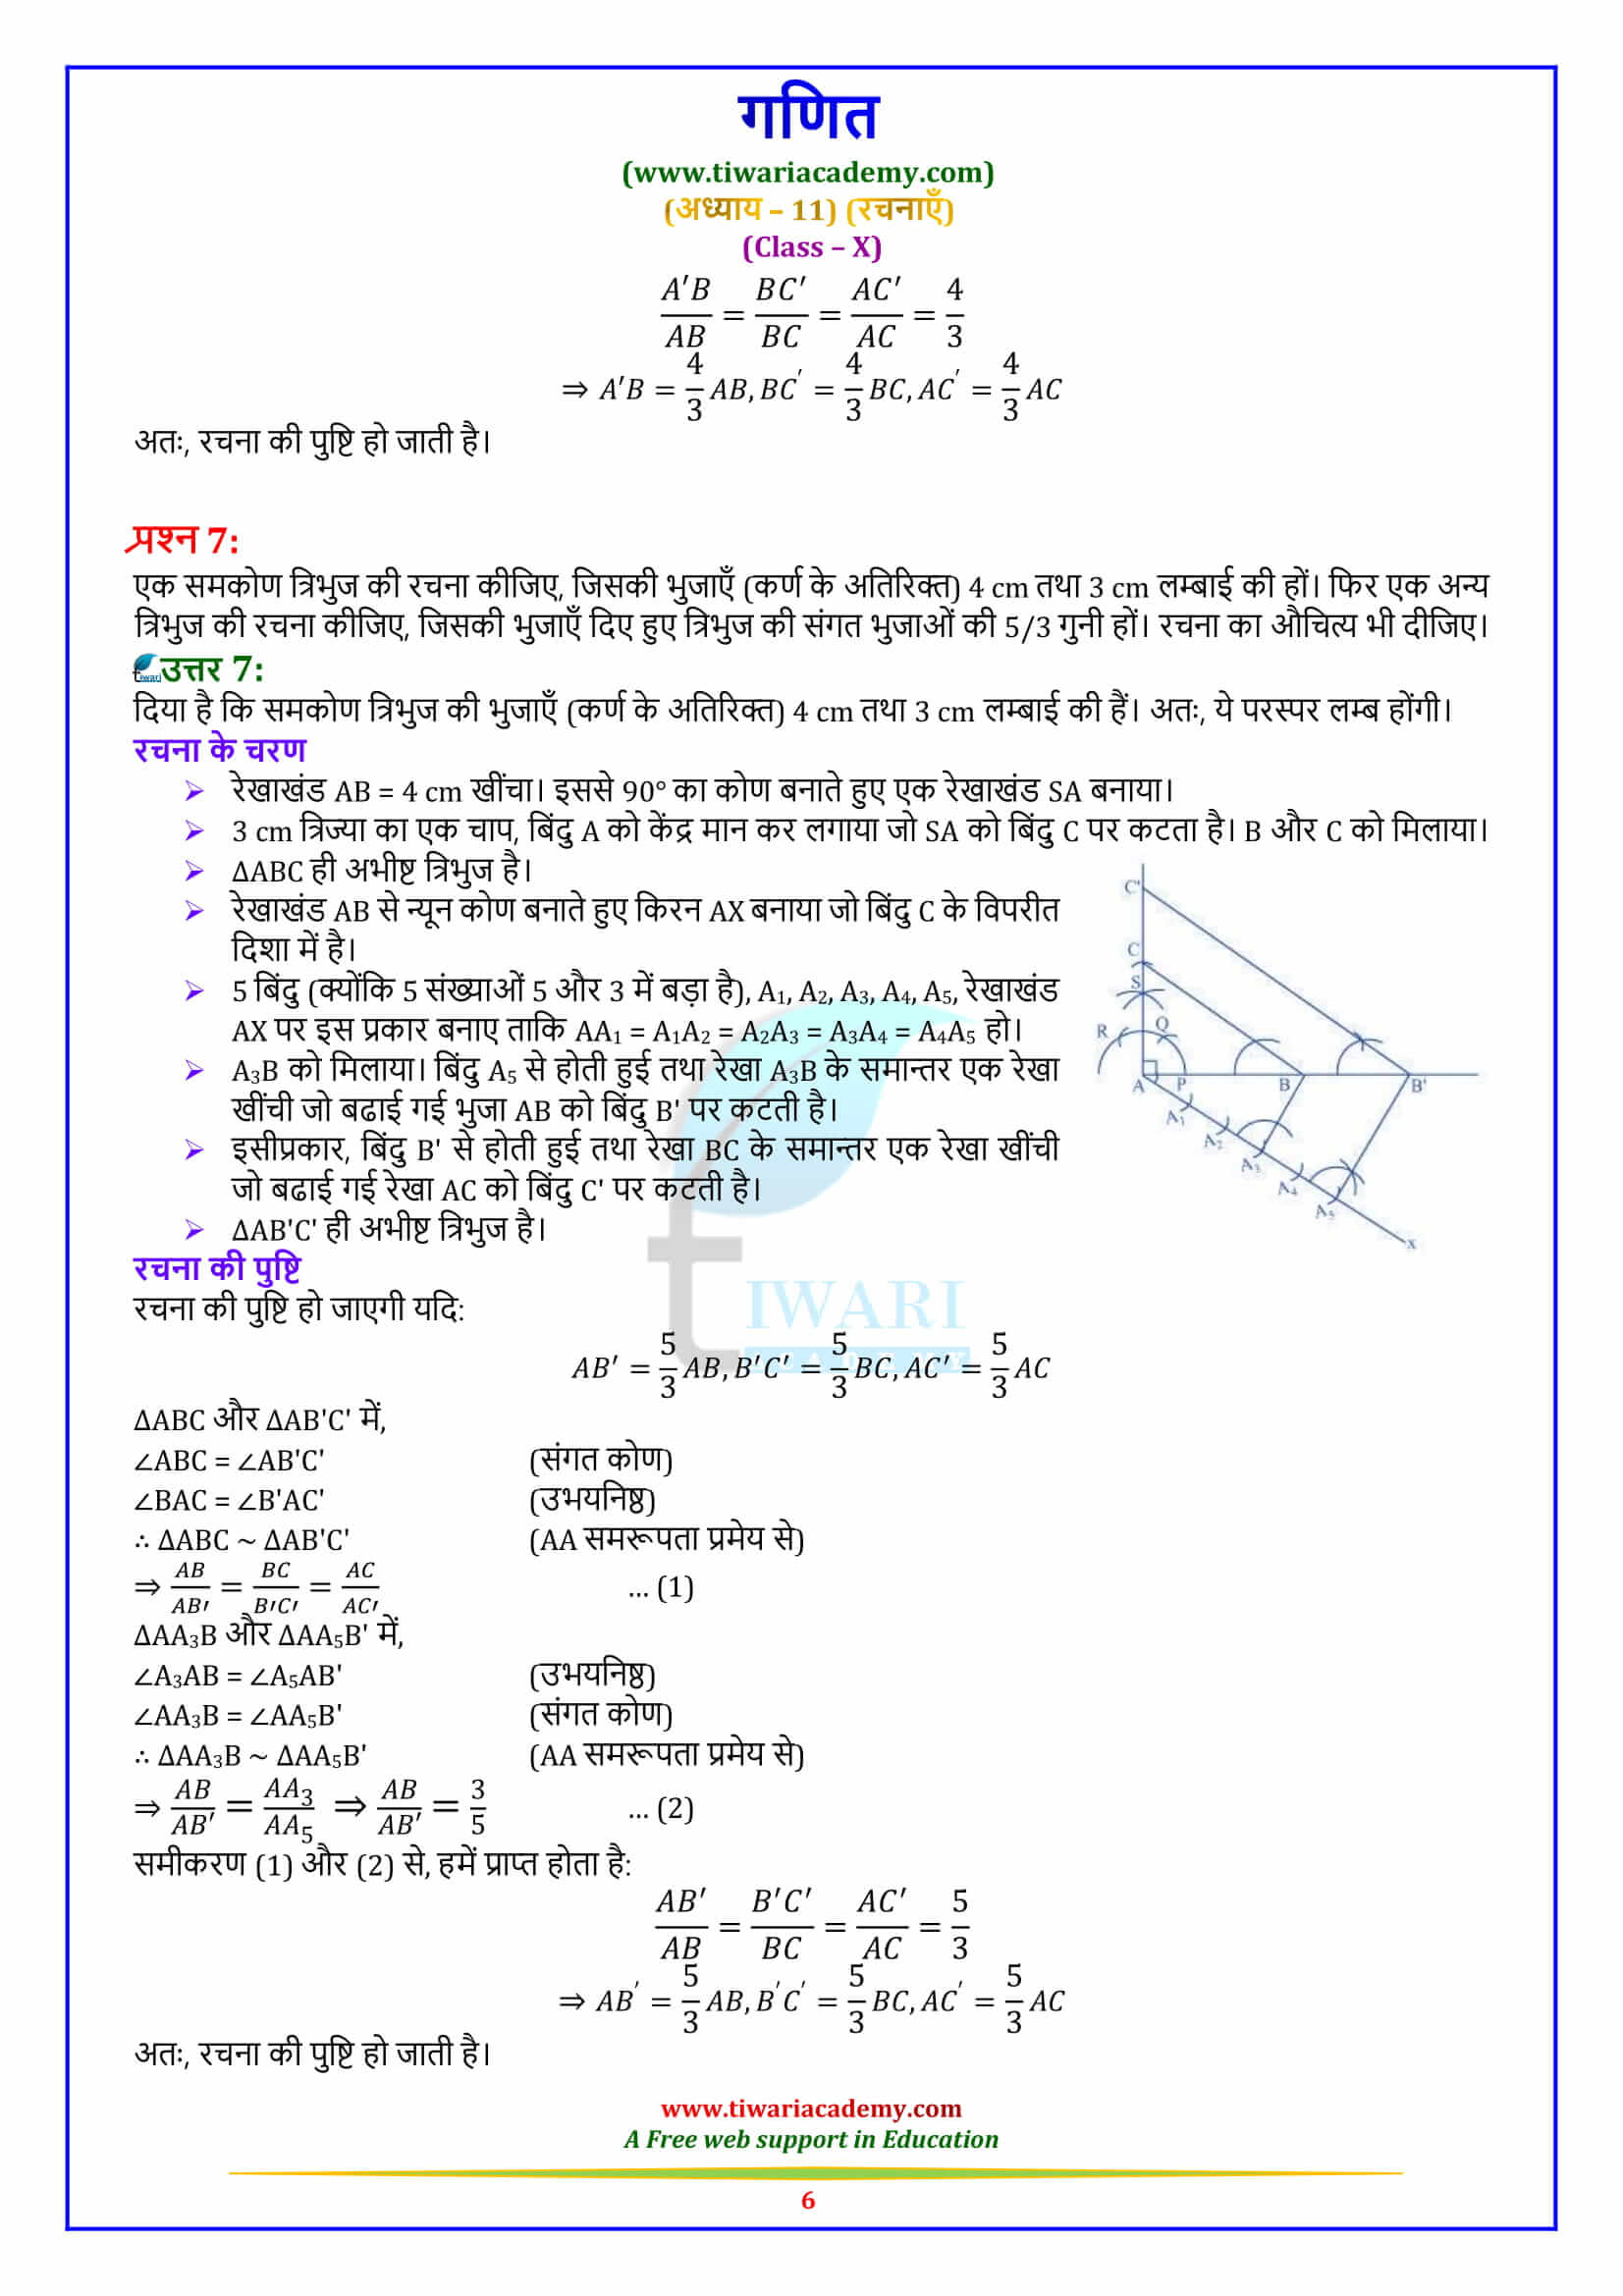 NCERT Solutions for Class 10 Maths Chapter 11 Exercise 11.1 free download